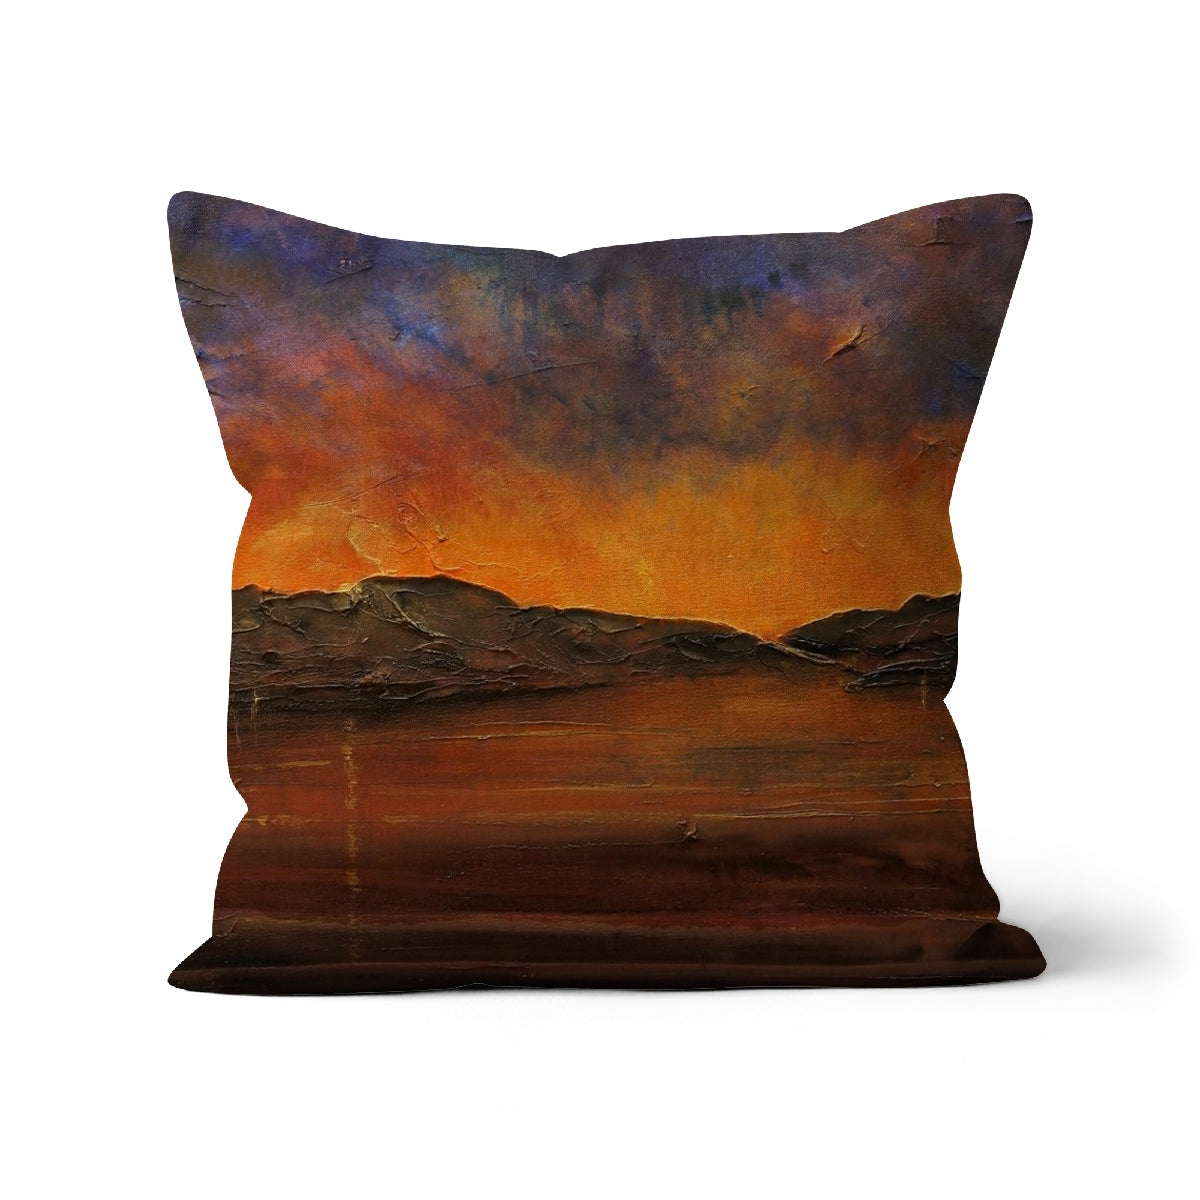 A Brooding Clyde Dusk Art Gifts Cushion-Cushions-River Clyde Art Gallery-Linen-18"x18"-Paintings, Prints, Homeware, Art Gifts From Scotland By Scottish Artist Kevin Hunter